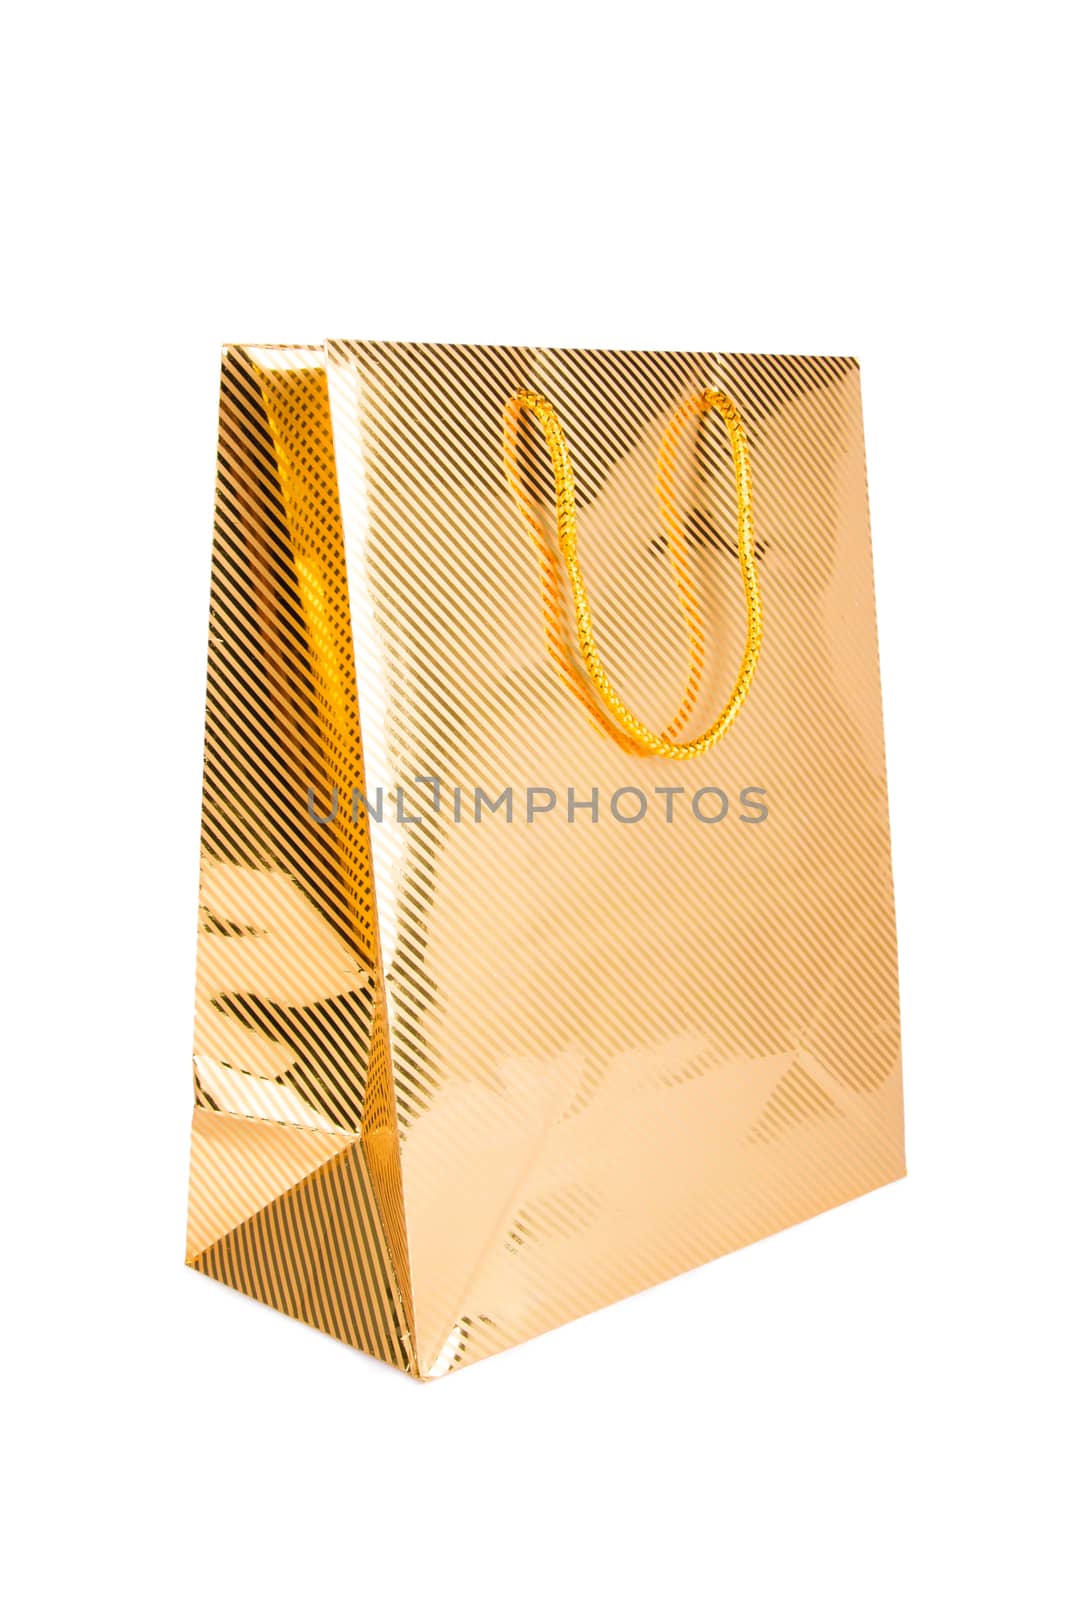 Paper shopping bag isolated on white - Stock Image